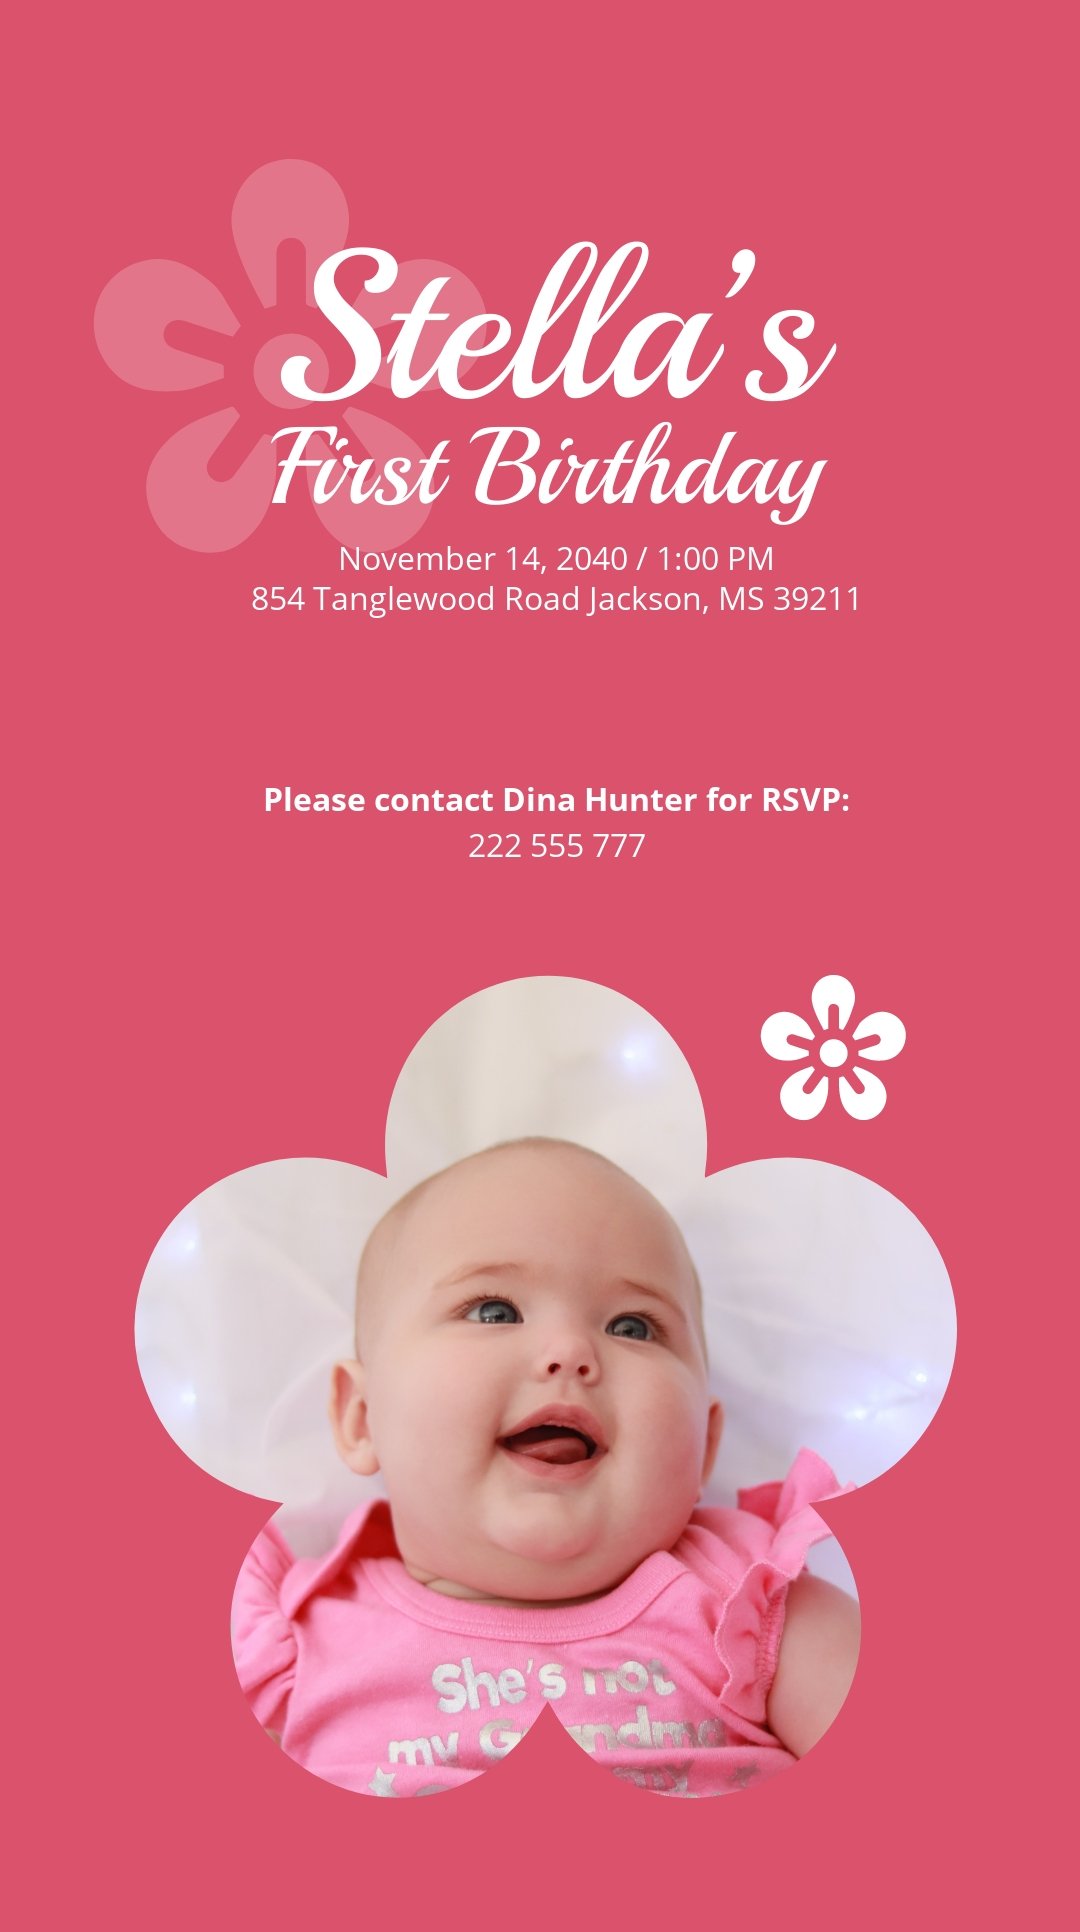 First Birthday Snapchat Geofilter Template